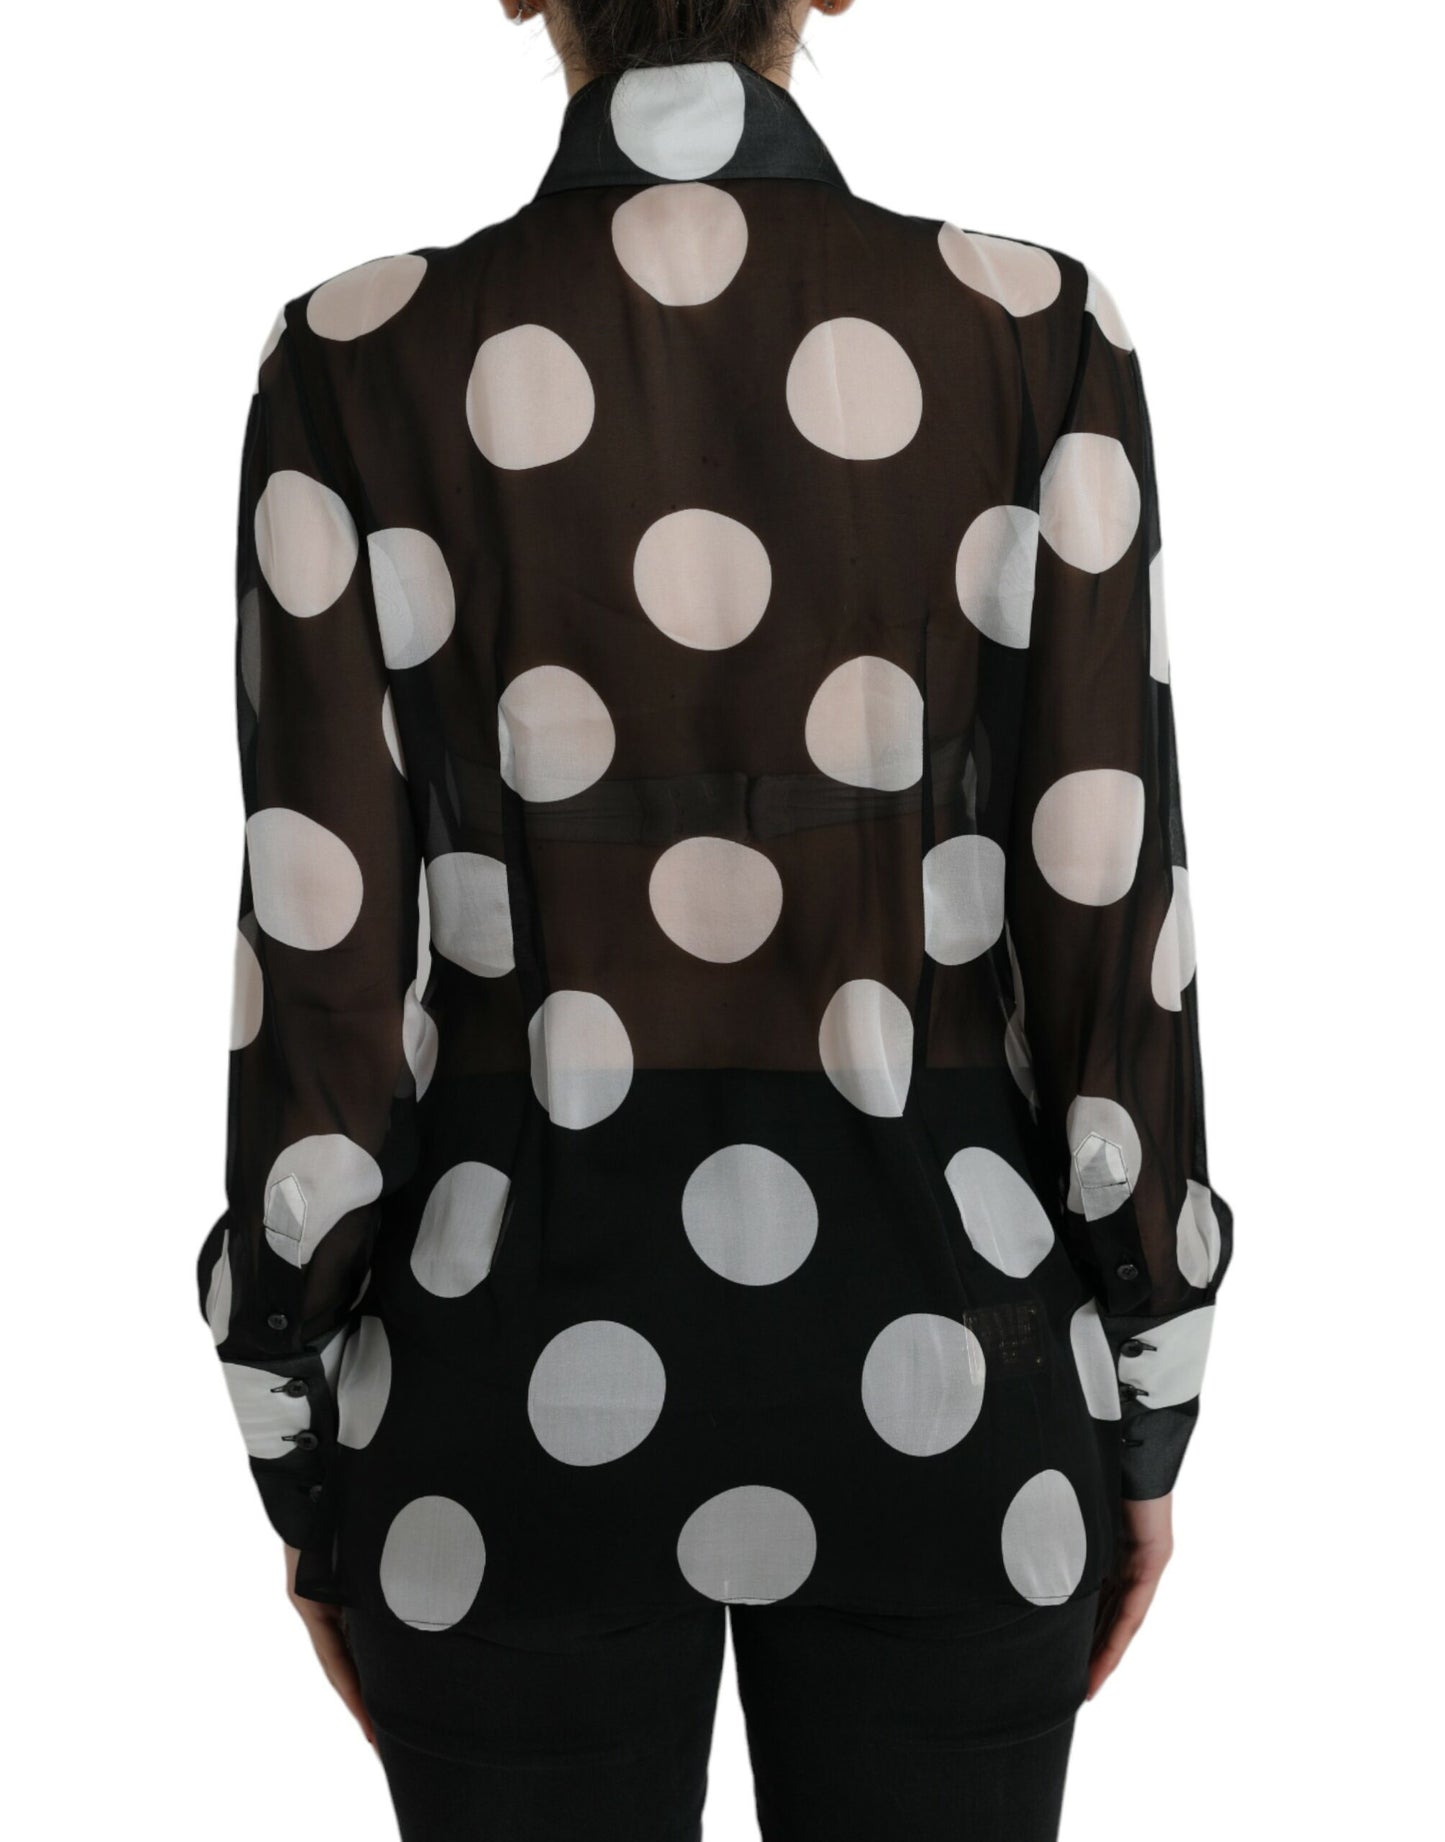 Silk Collared Button-Up Blouse in Black & White